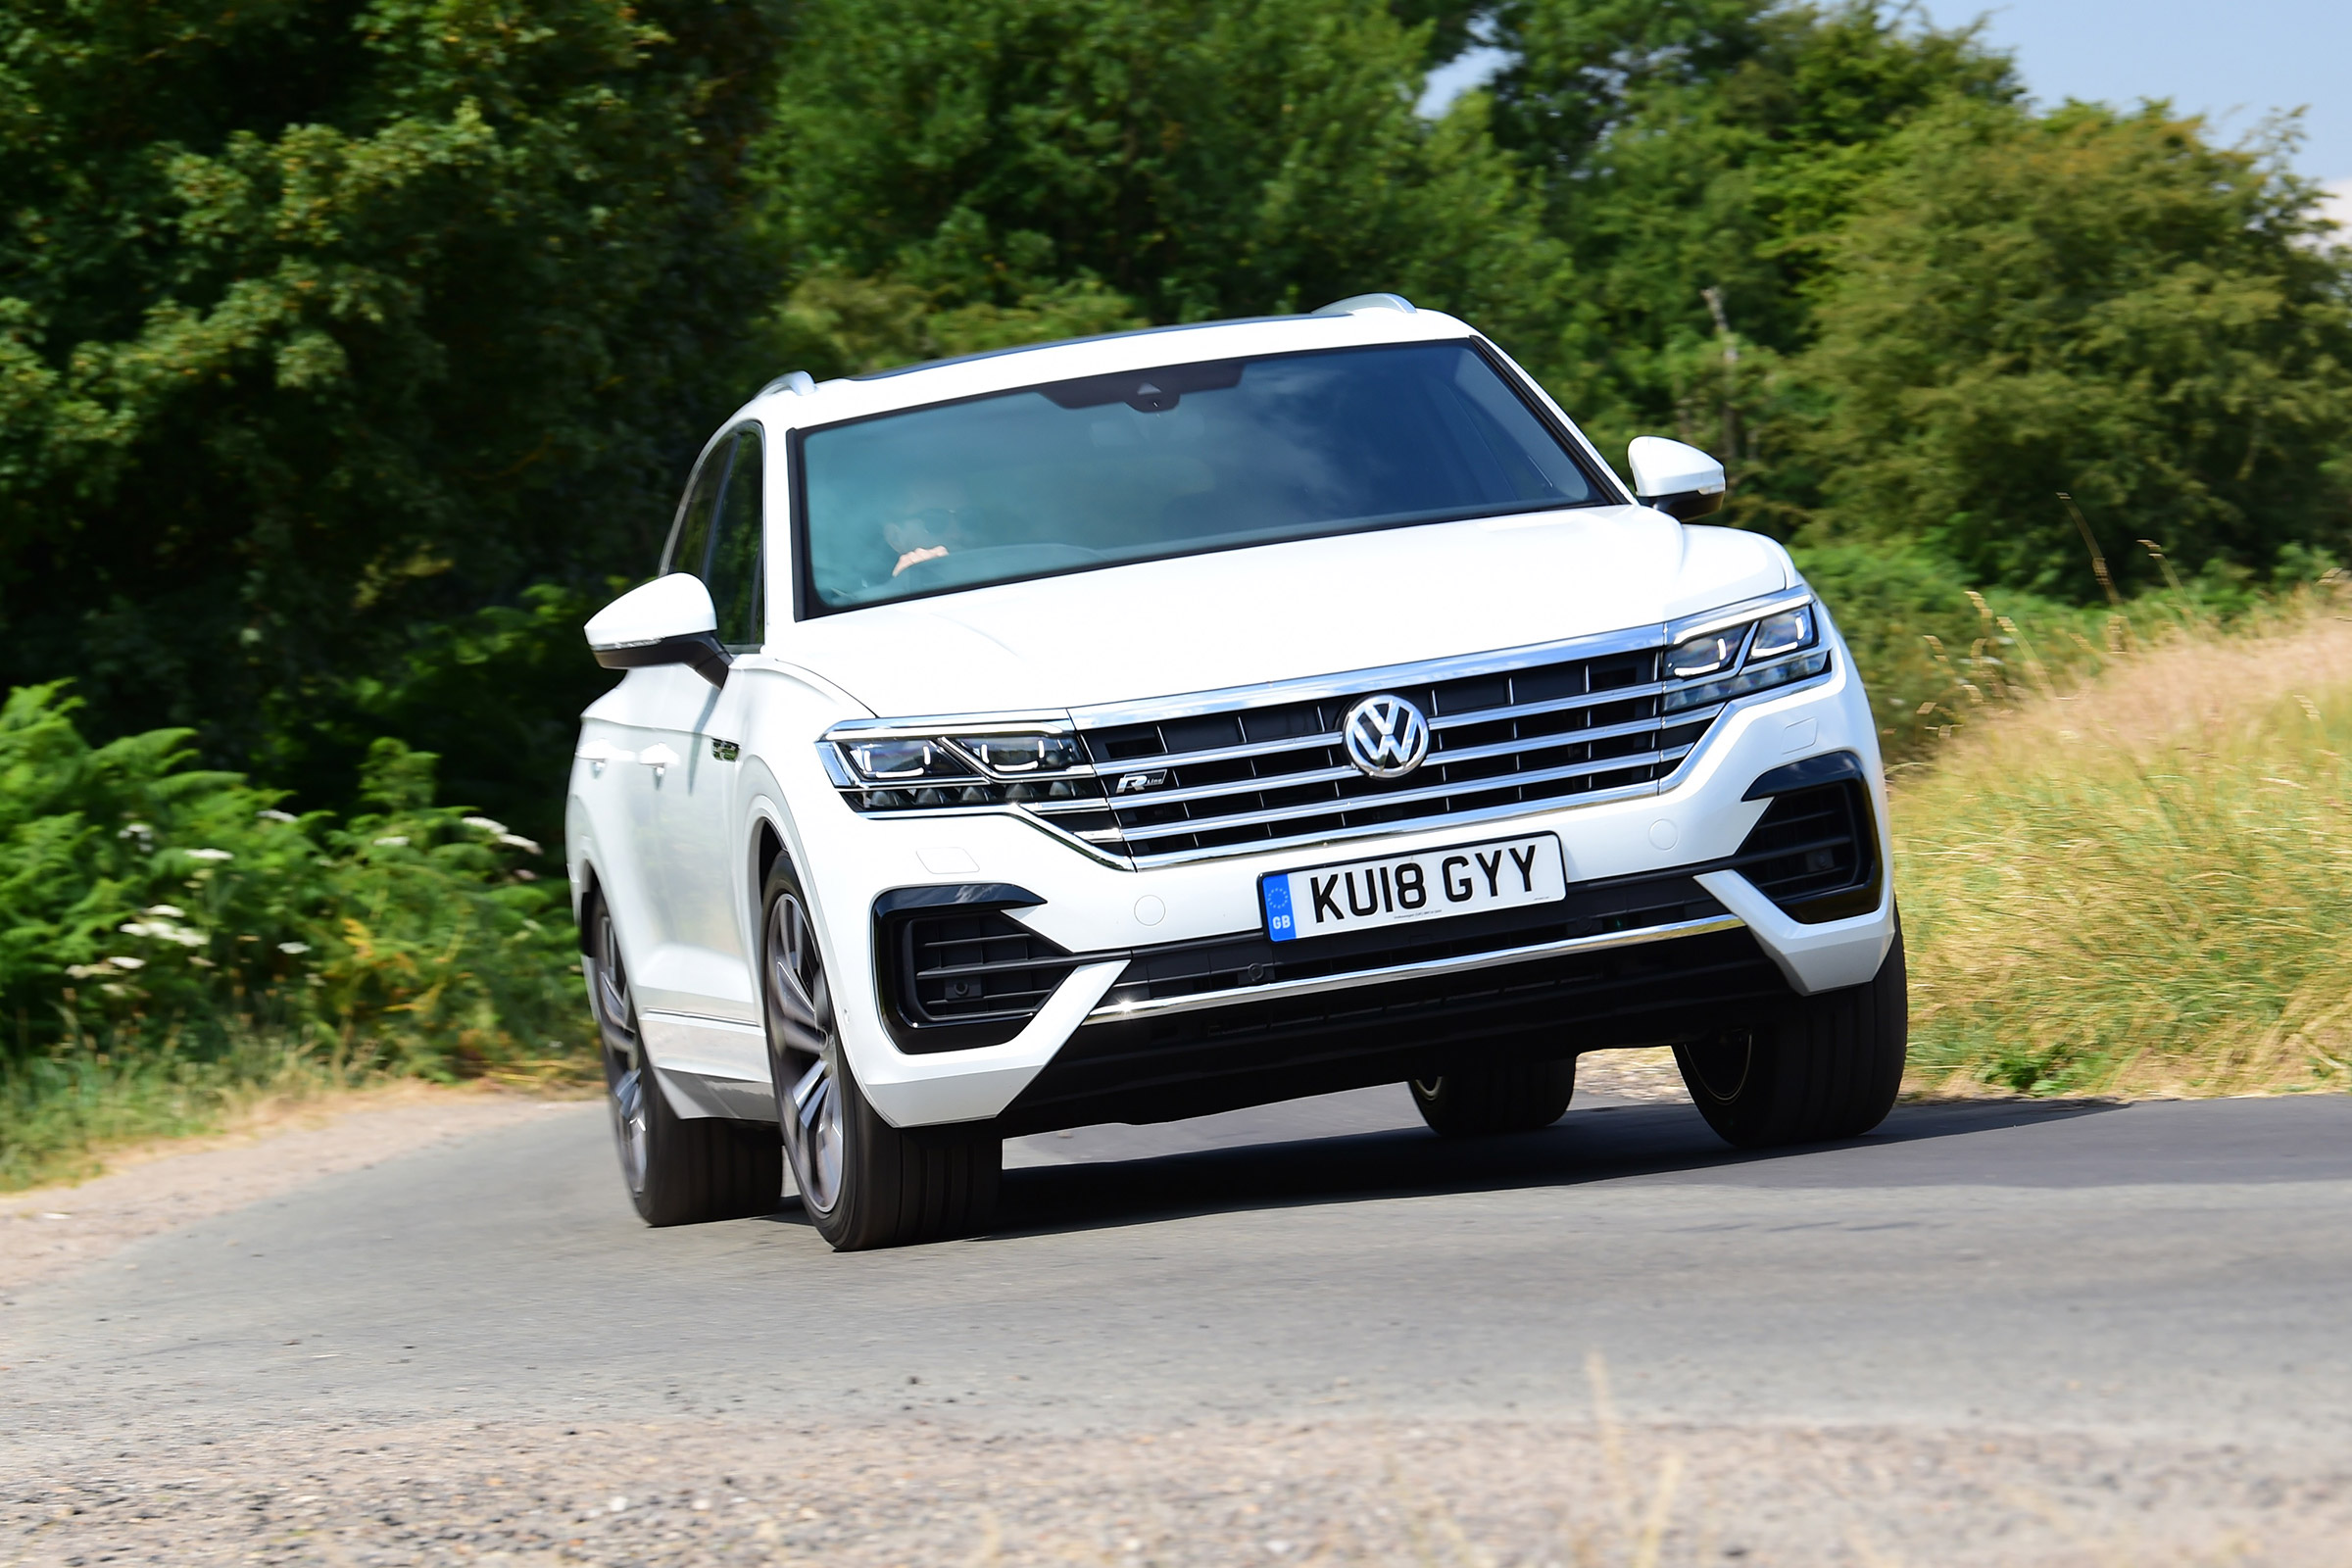 New 2018 Volkswagen Touareg review – a Bentayga without the badge?